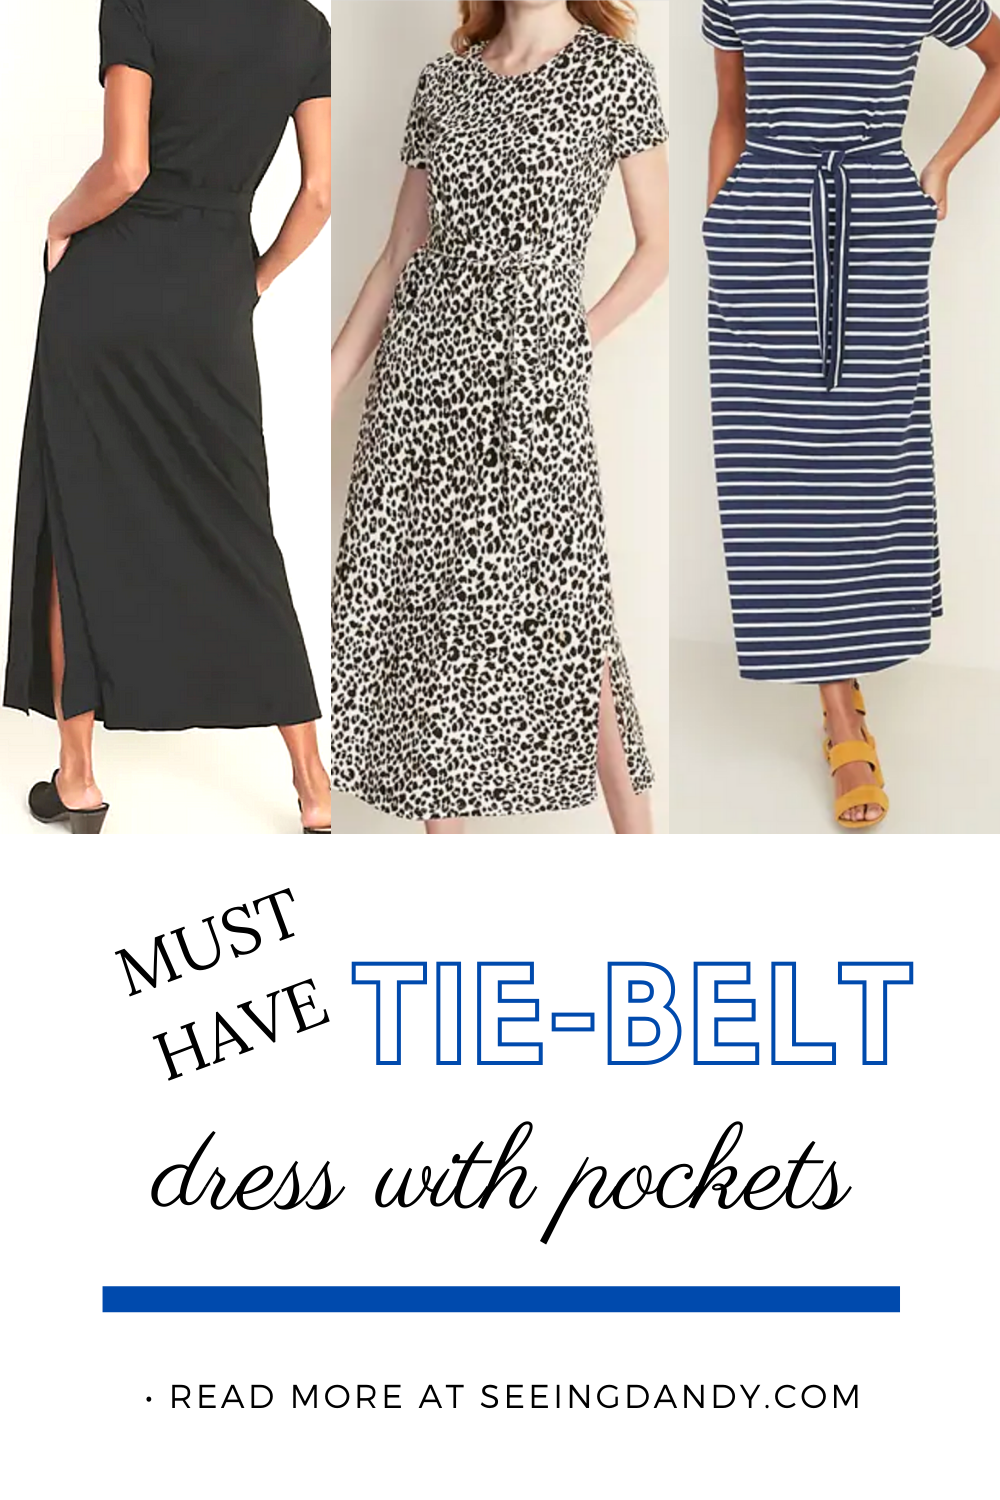 Must have Old Navy style tie belt dress with pockets summer style